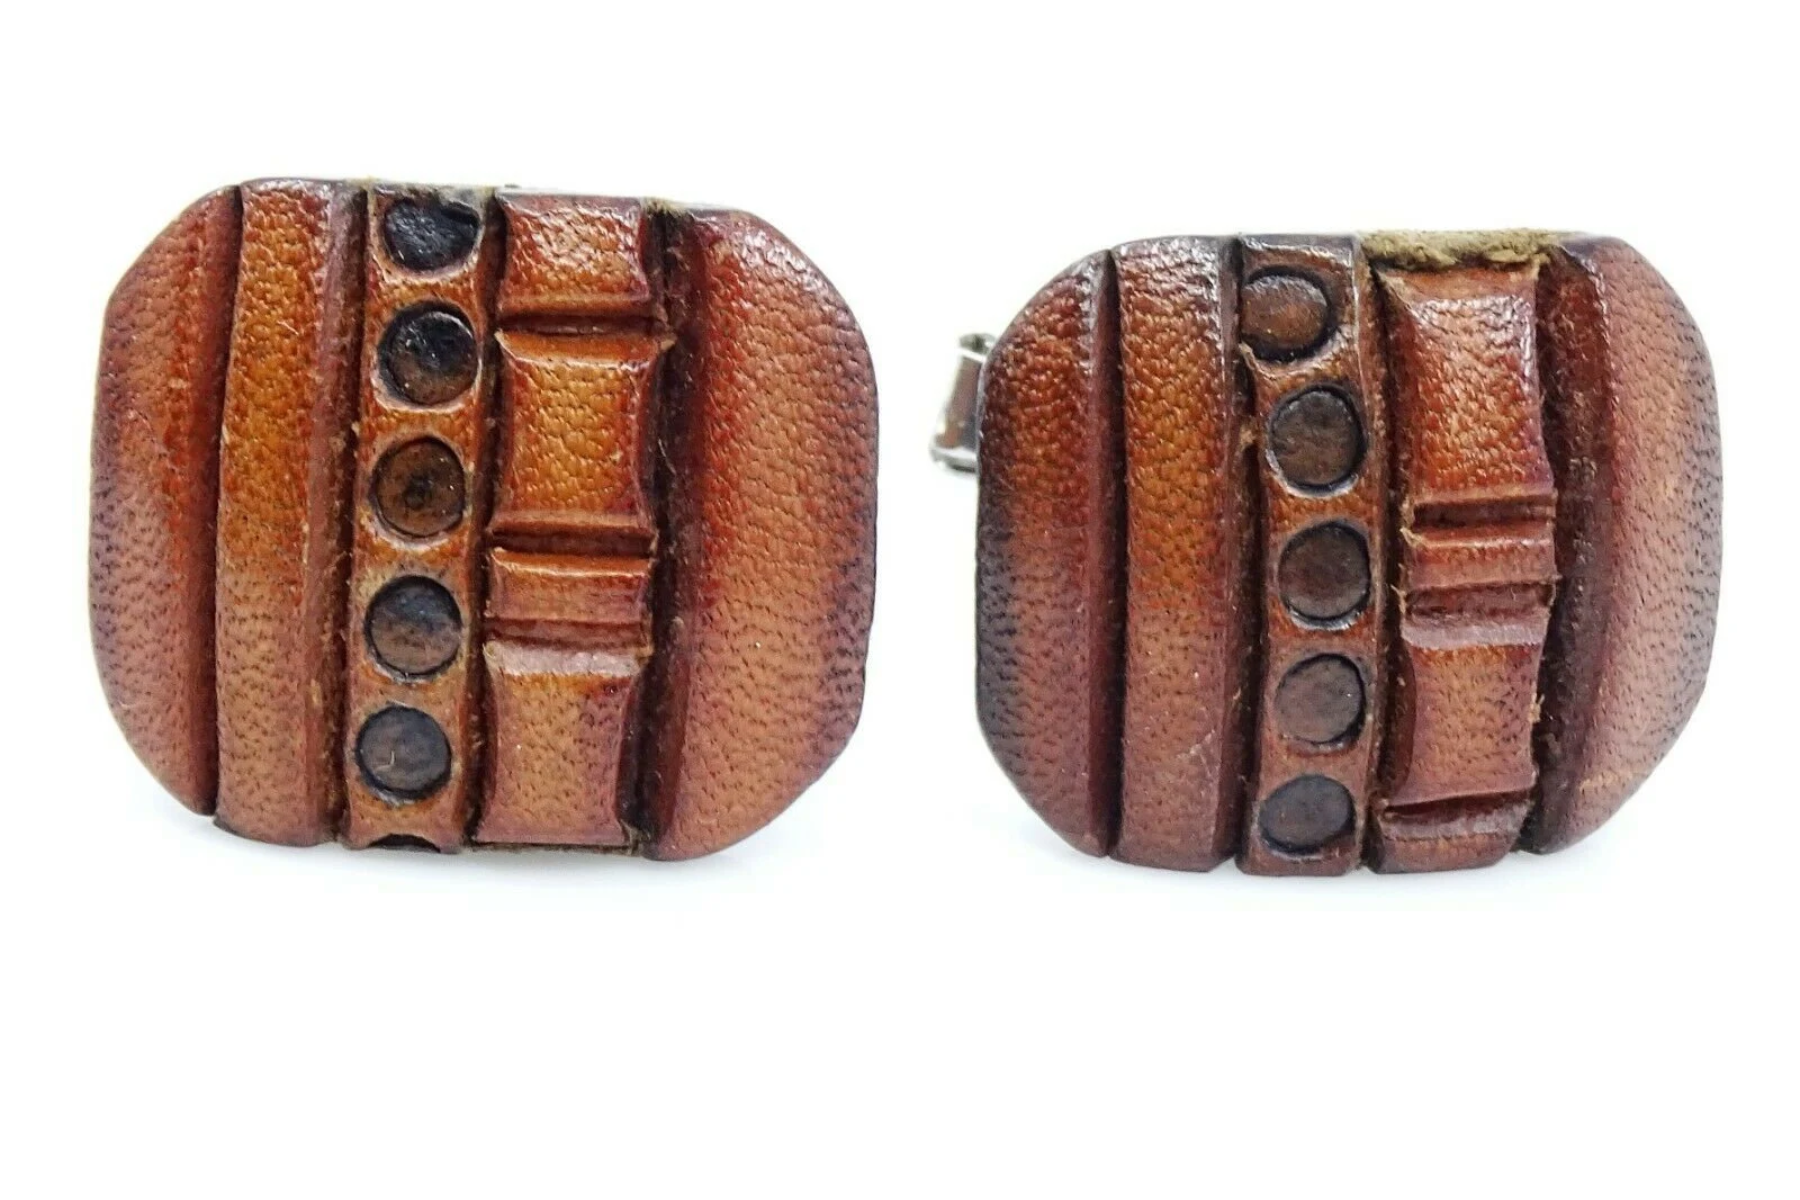 Leather cufflinks on a white background